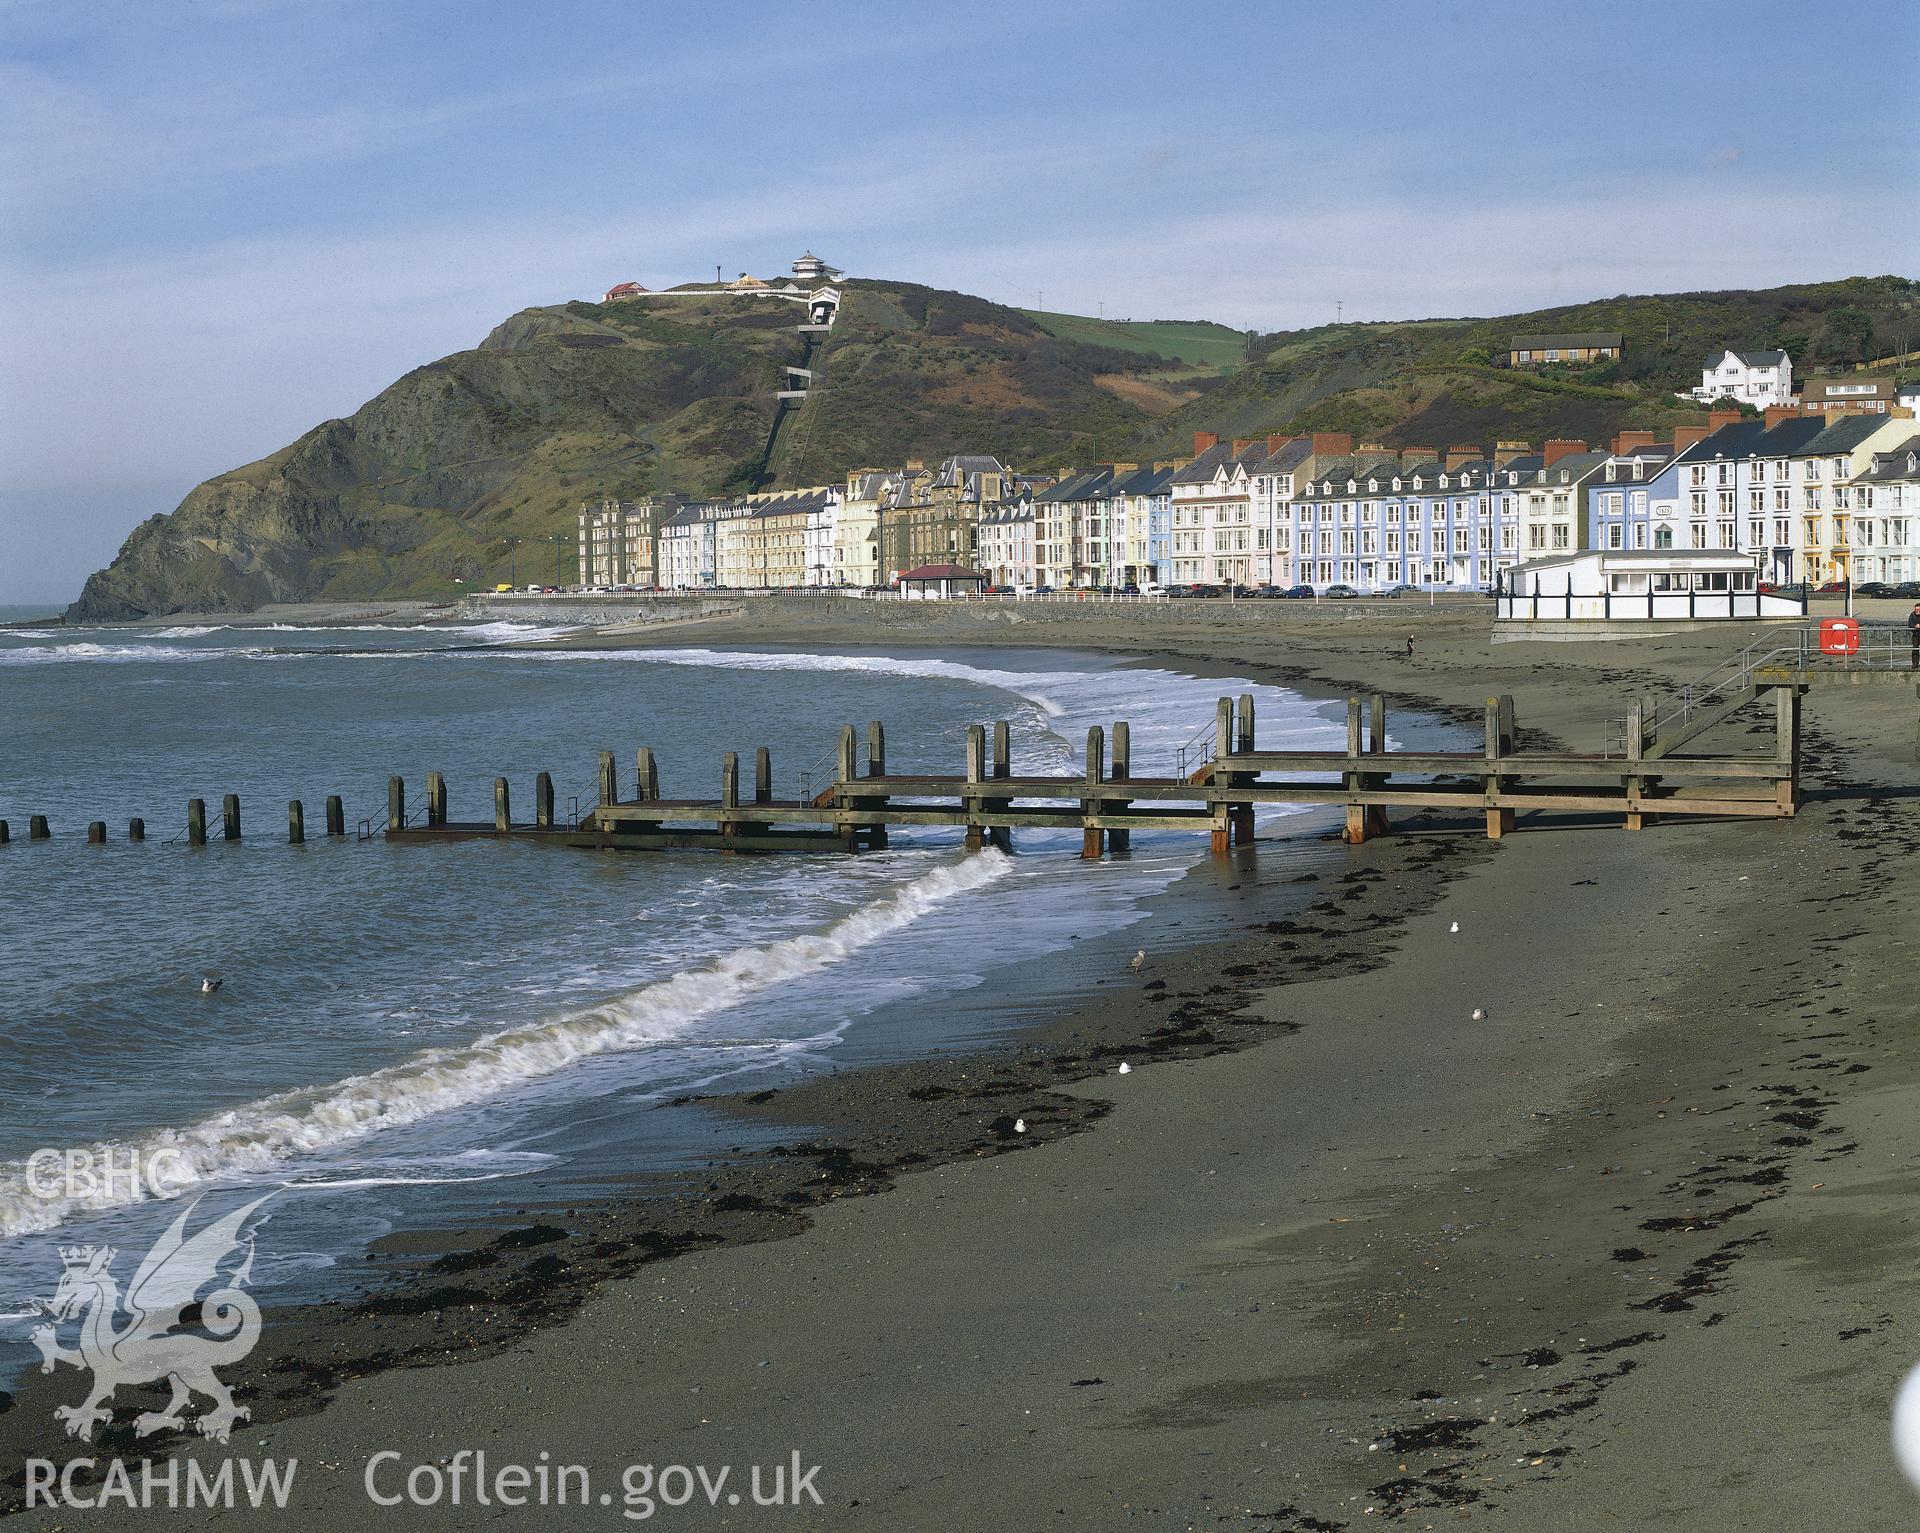 RCAHMW colour transparency showing view of the Promenade, Aberystwyth.